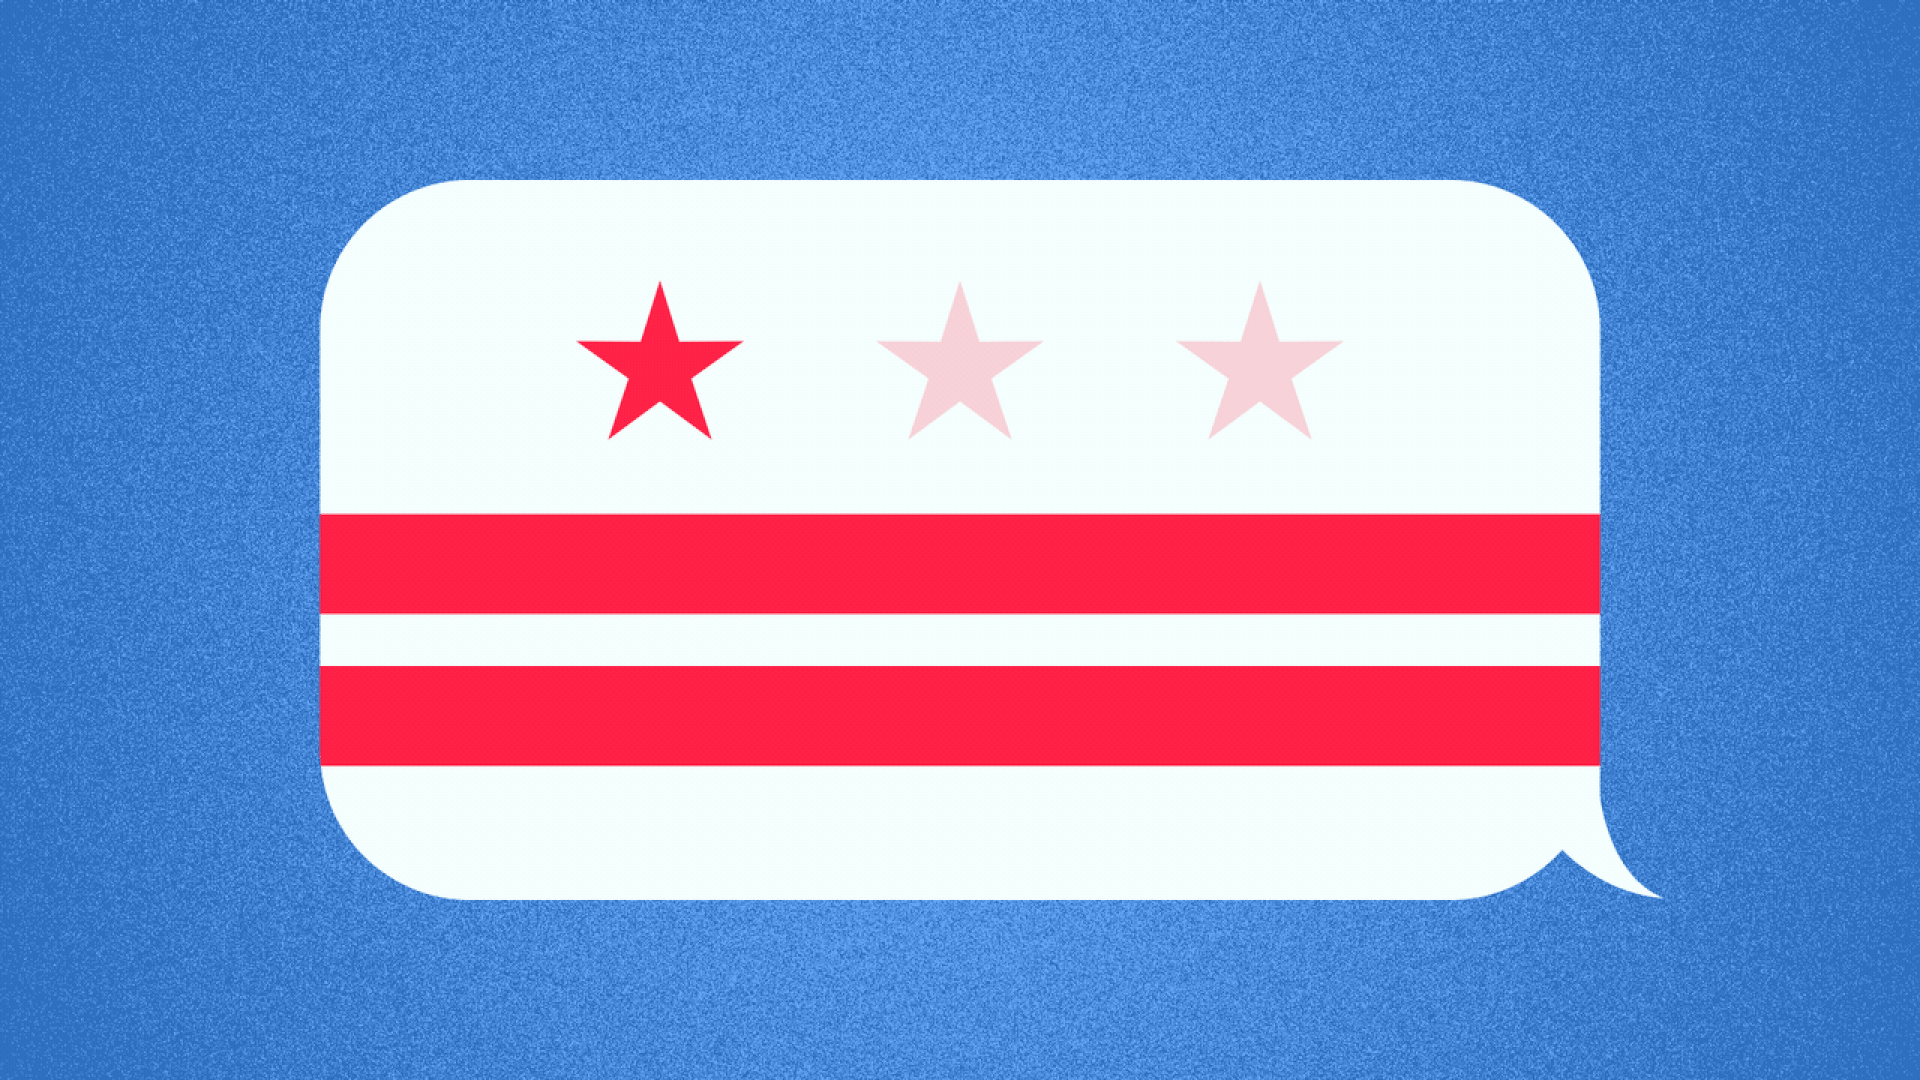 Illustration of a text-message balloon that looks like the Washington D.C. flag, with the stars fading in and out like a text-message waiting animation.